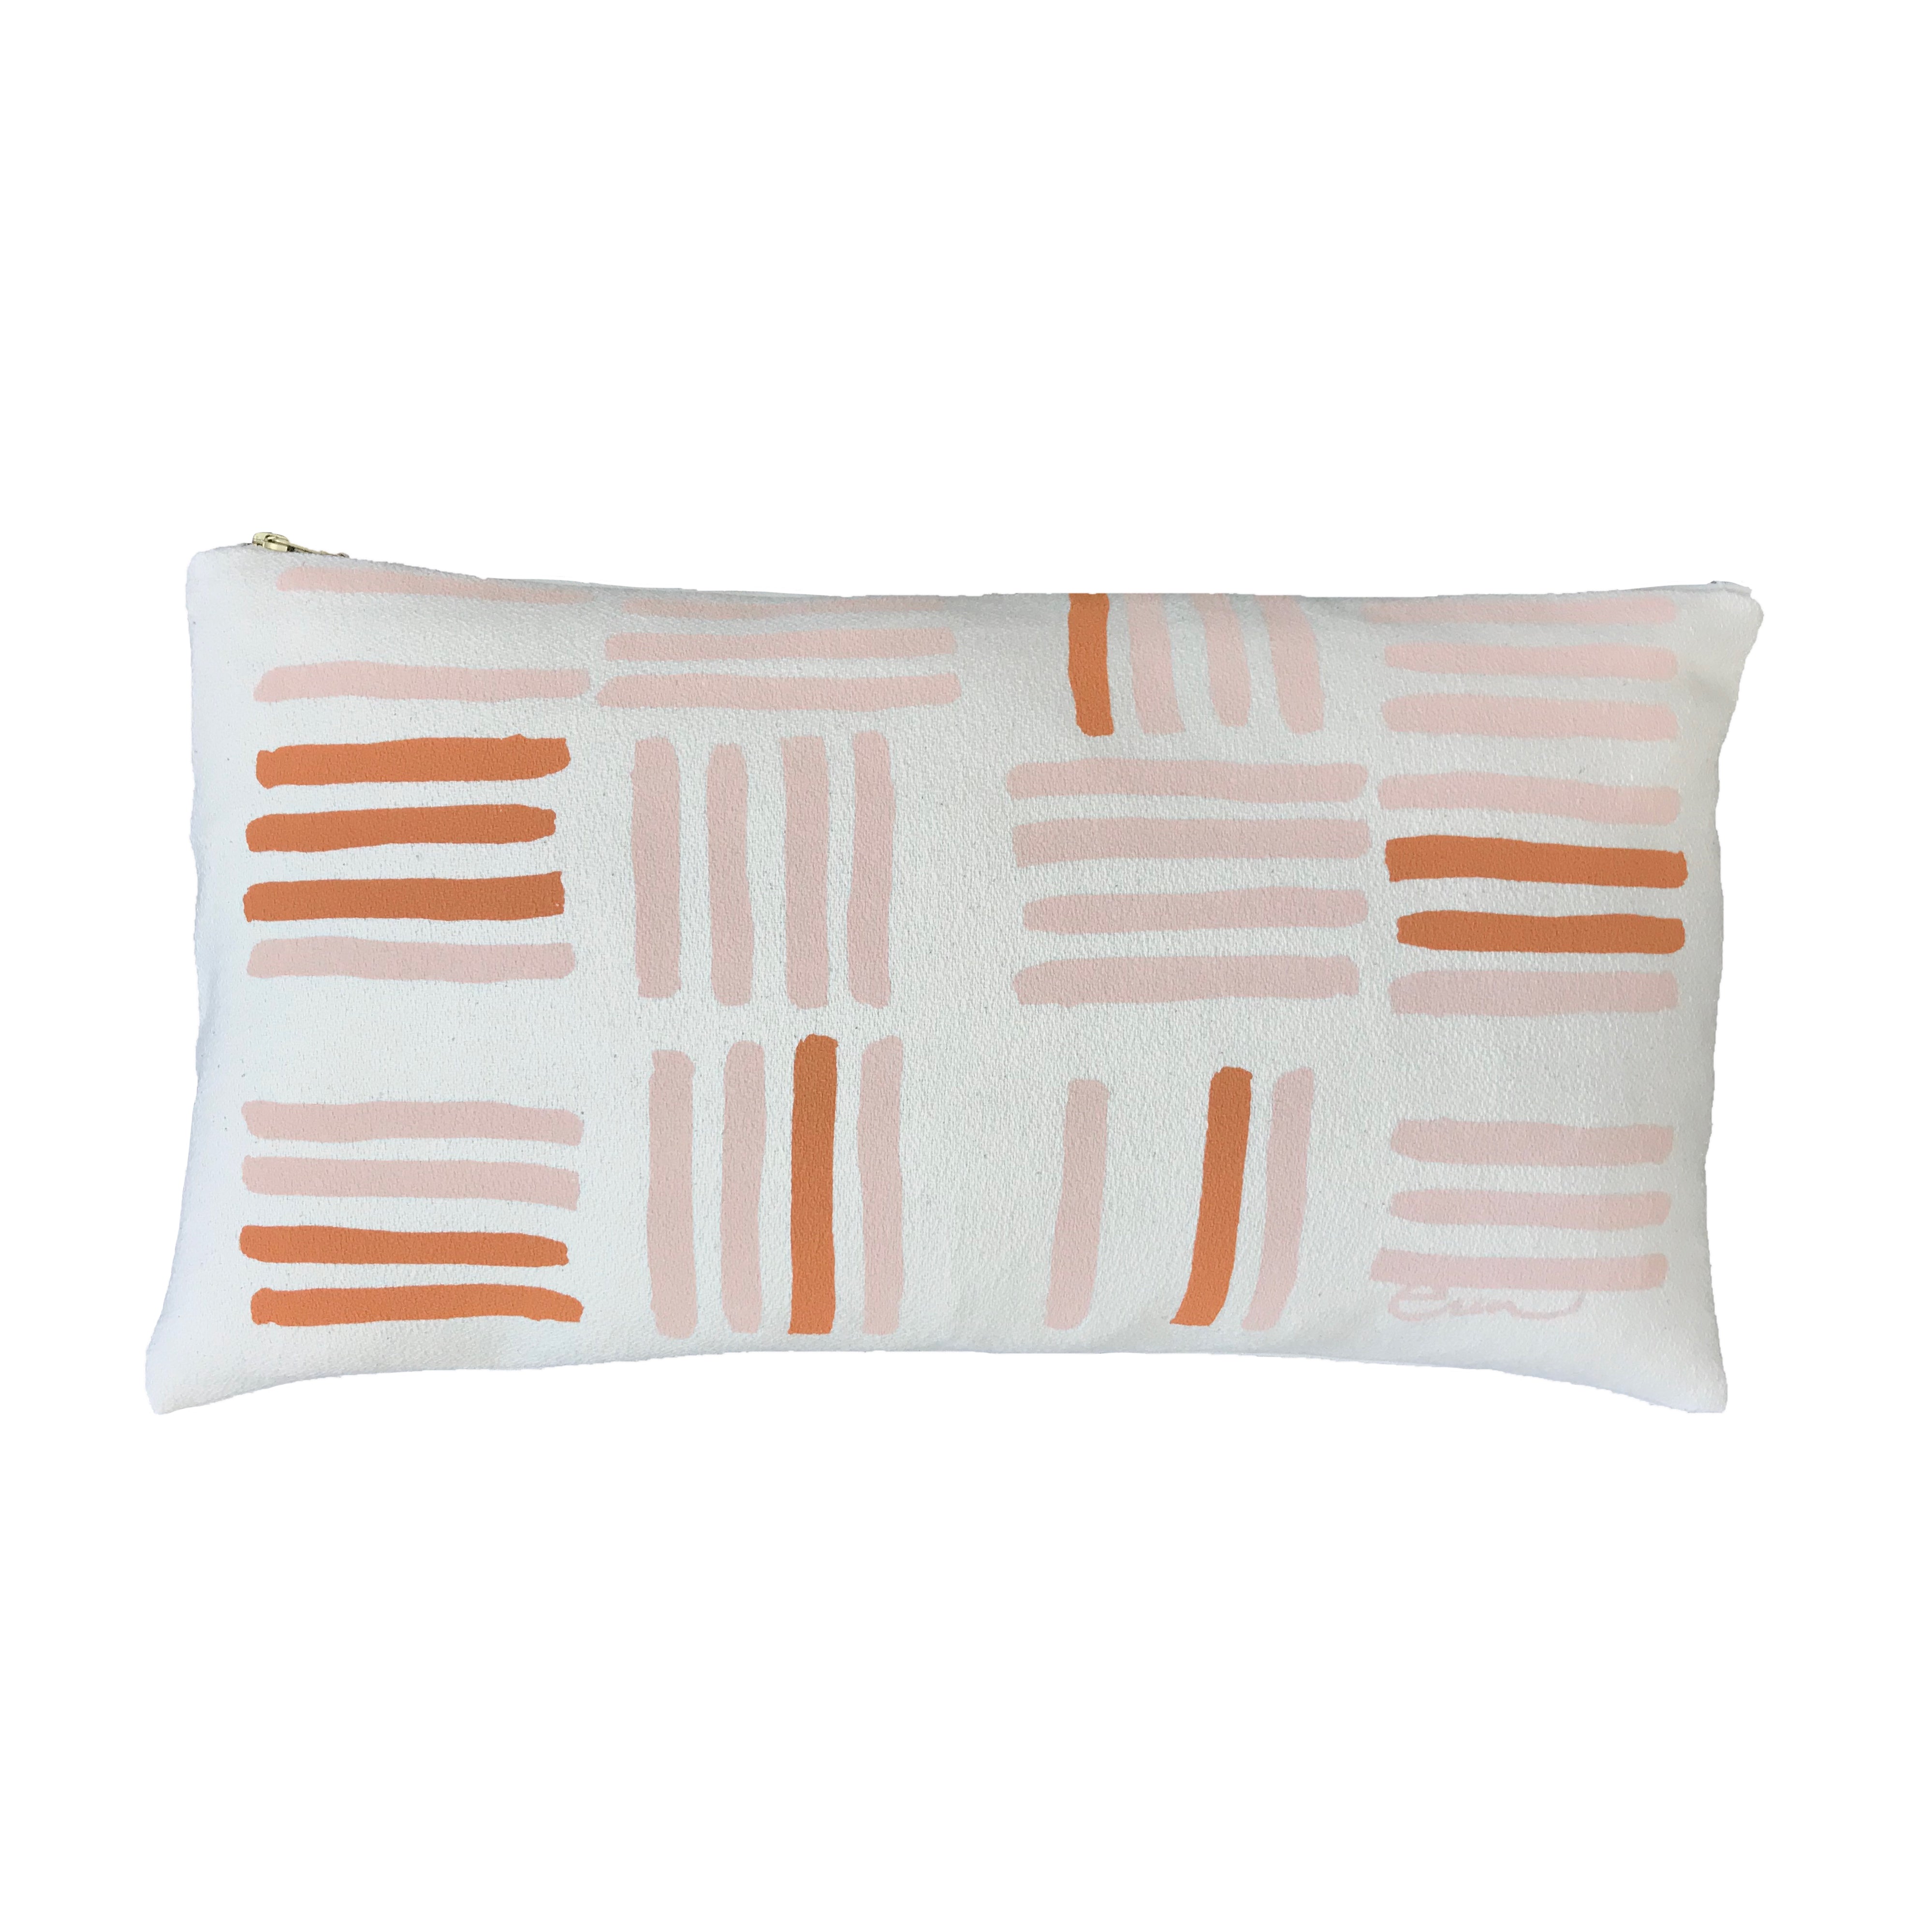 DUSTY PINK GRID PILLOW